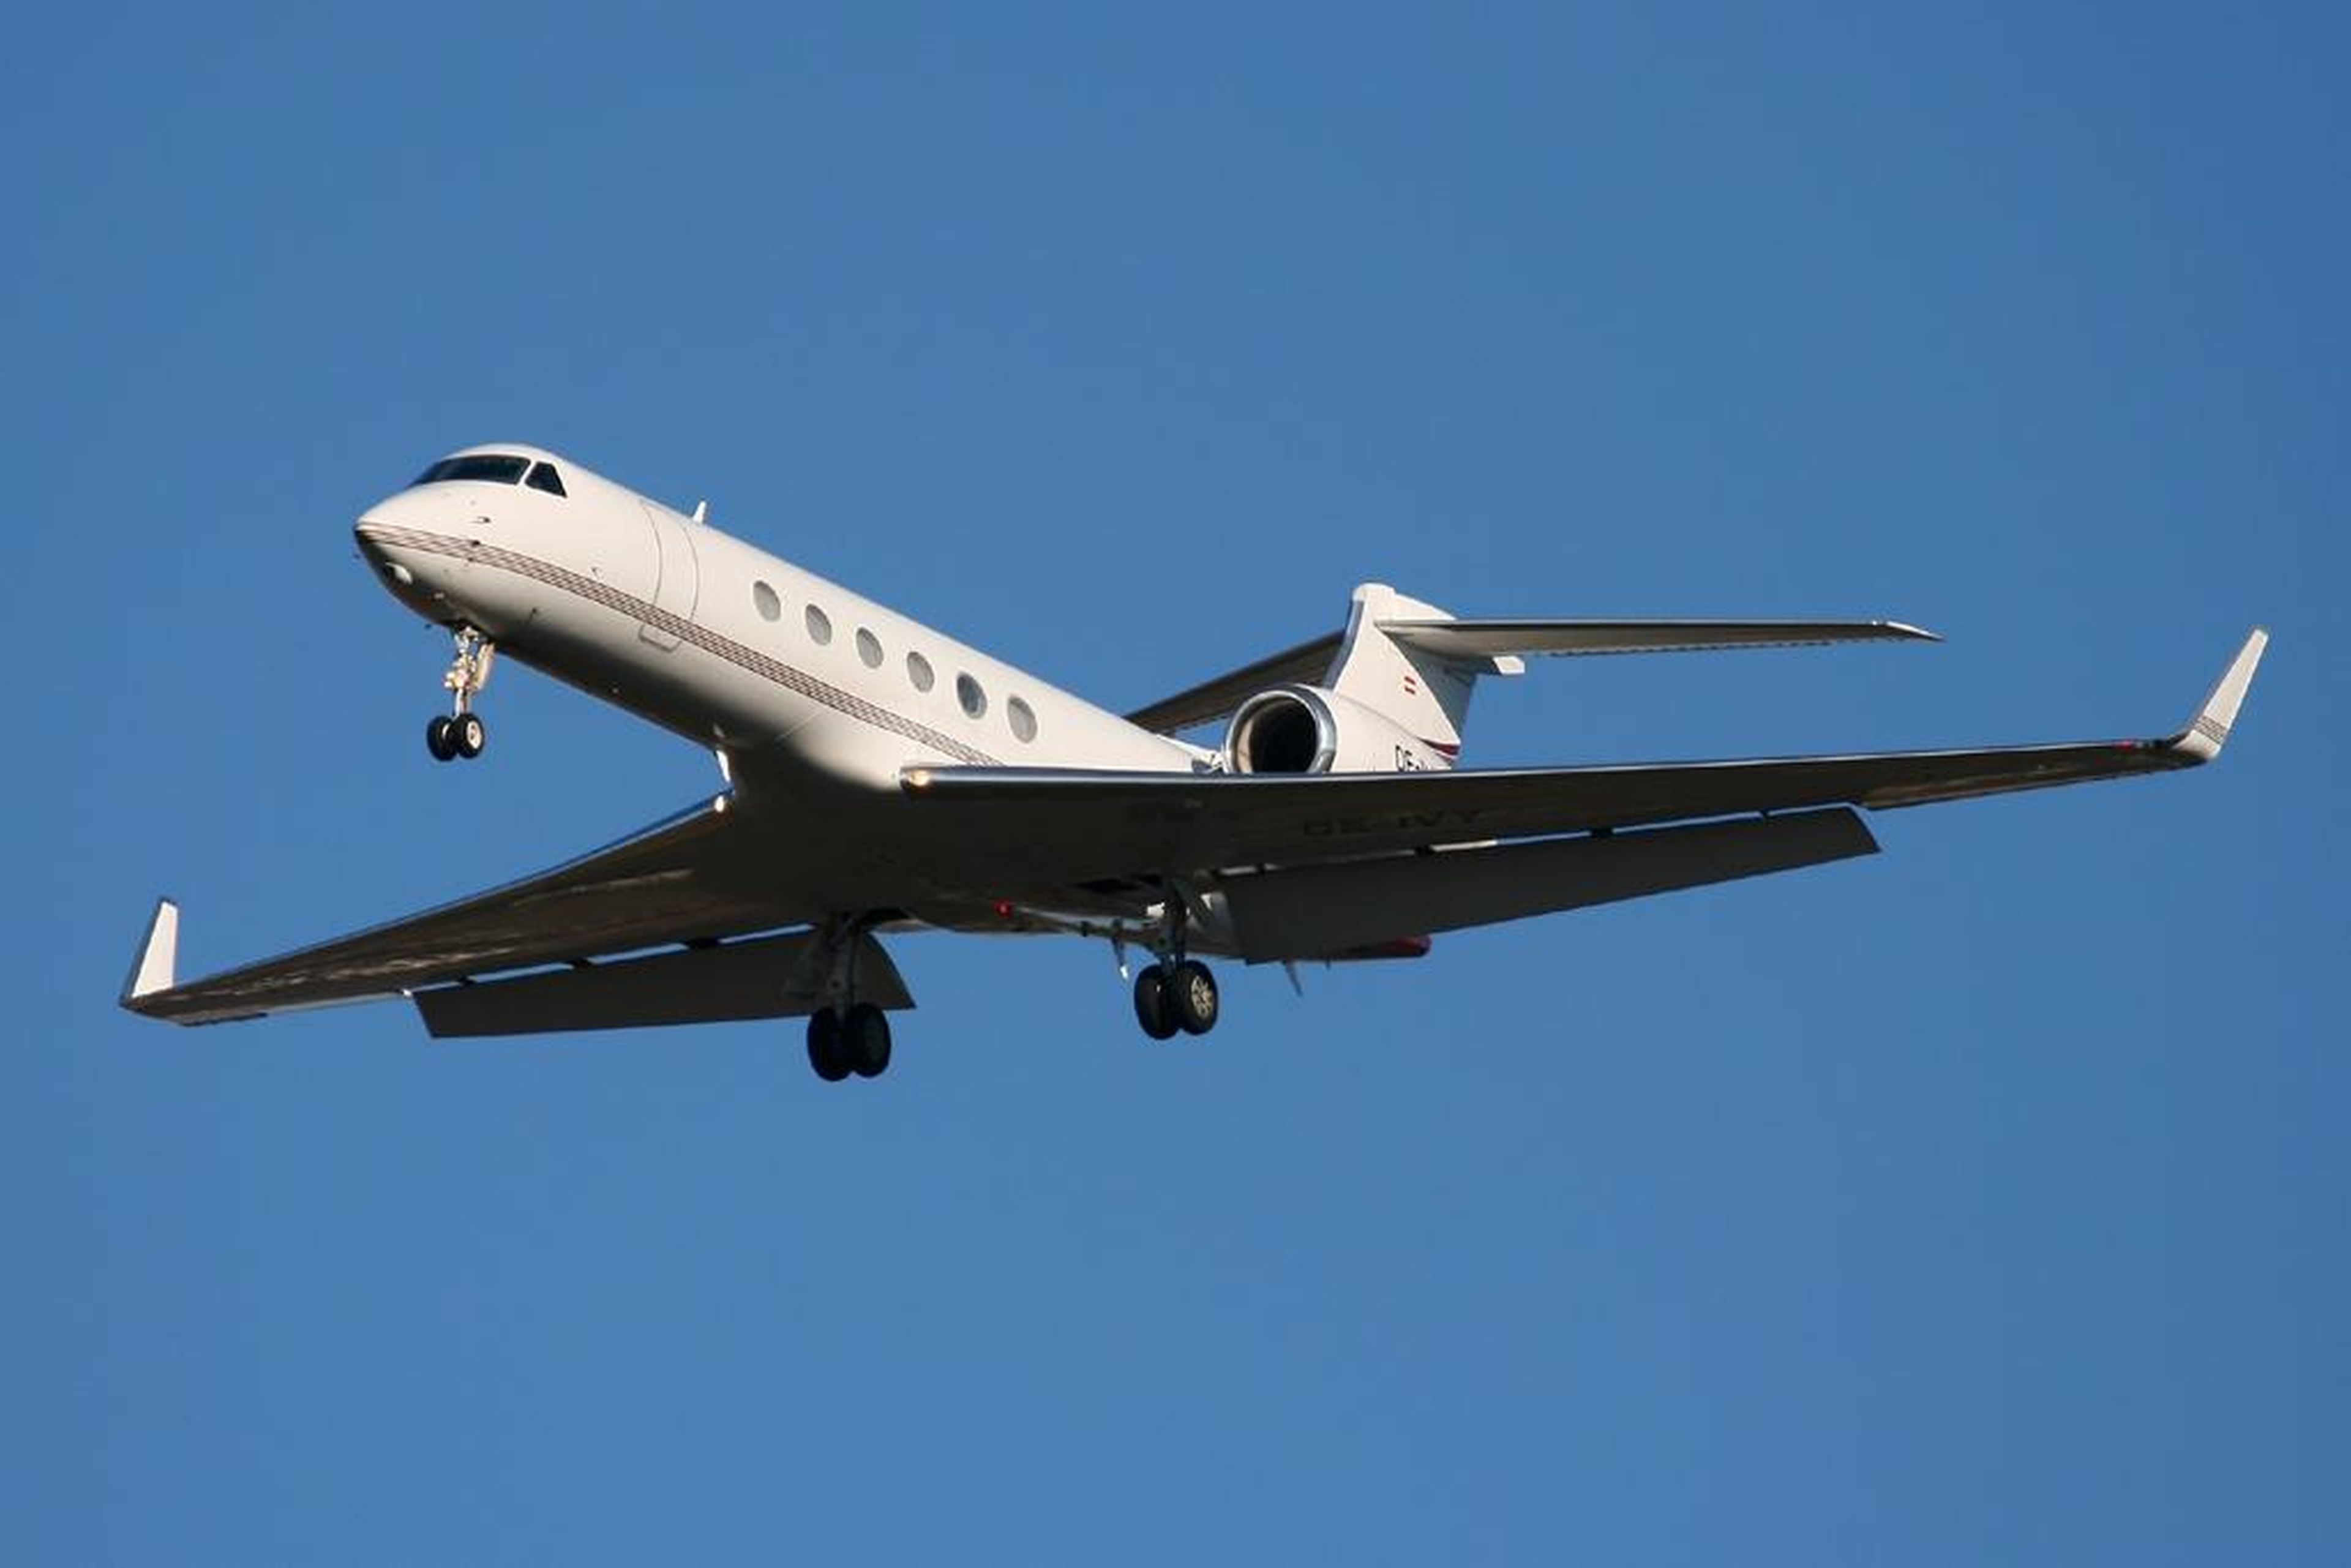 Cuban actually put himself in the Guinness Book of World Records when he bought his first plane, a Gulfstream V jet, in 1999. His $40 million purchase set the record for the largest single internet transaction.